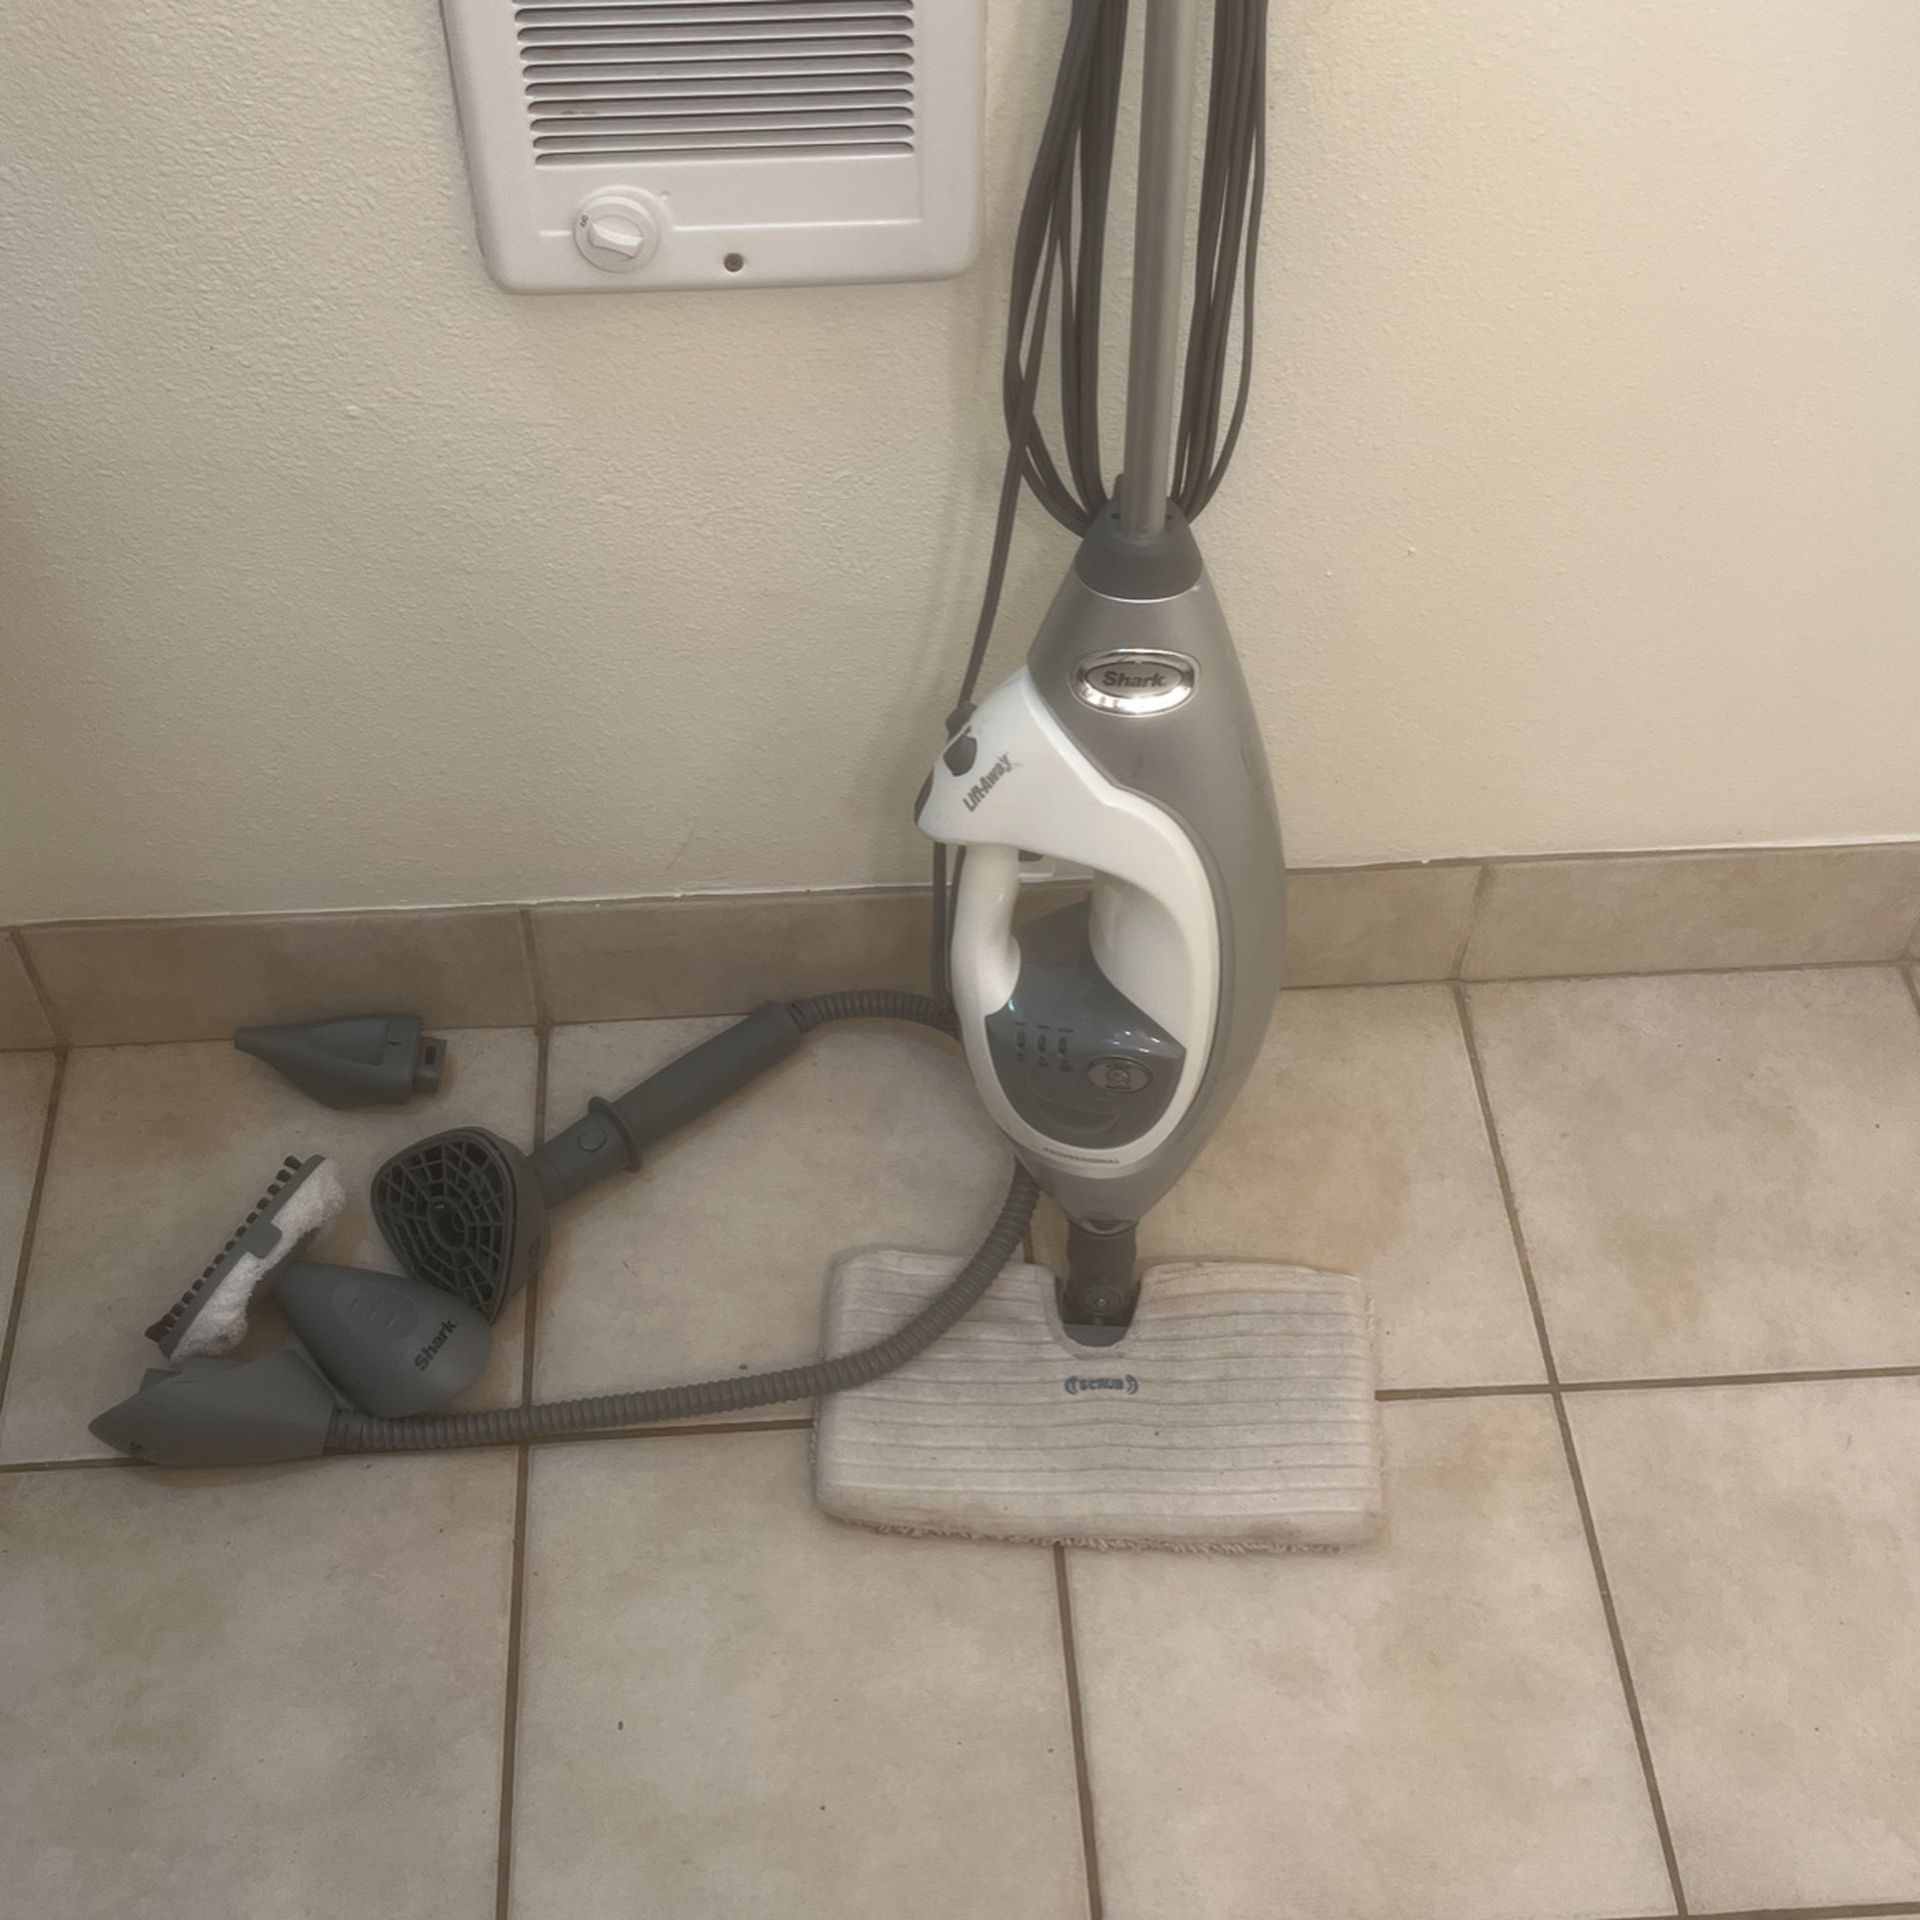 Shark steam mop With Attachments